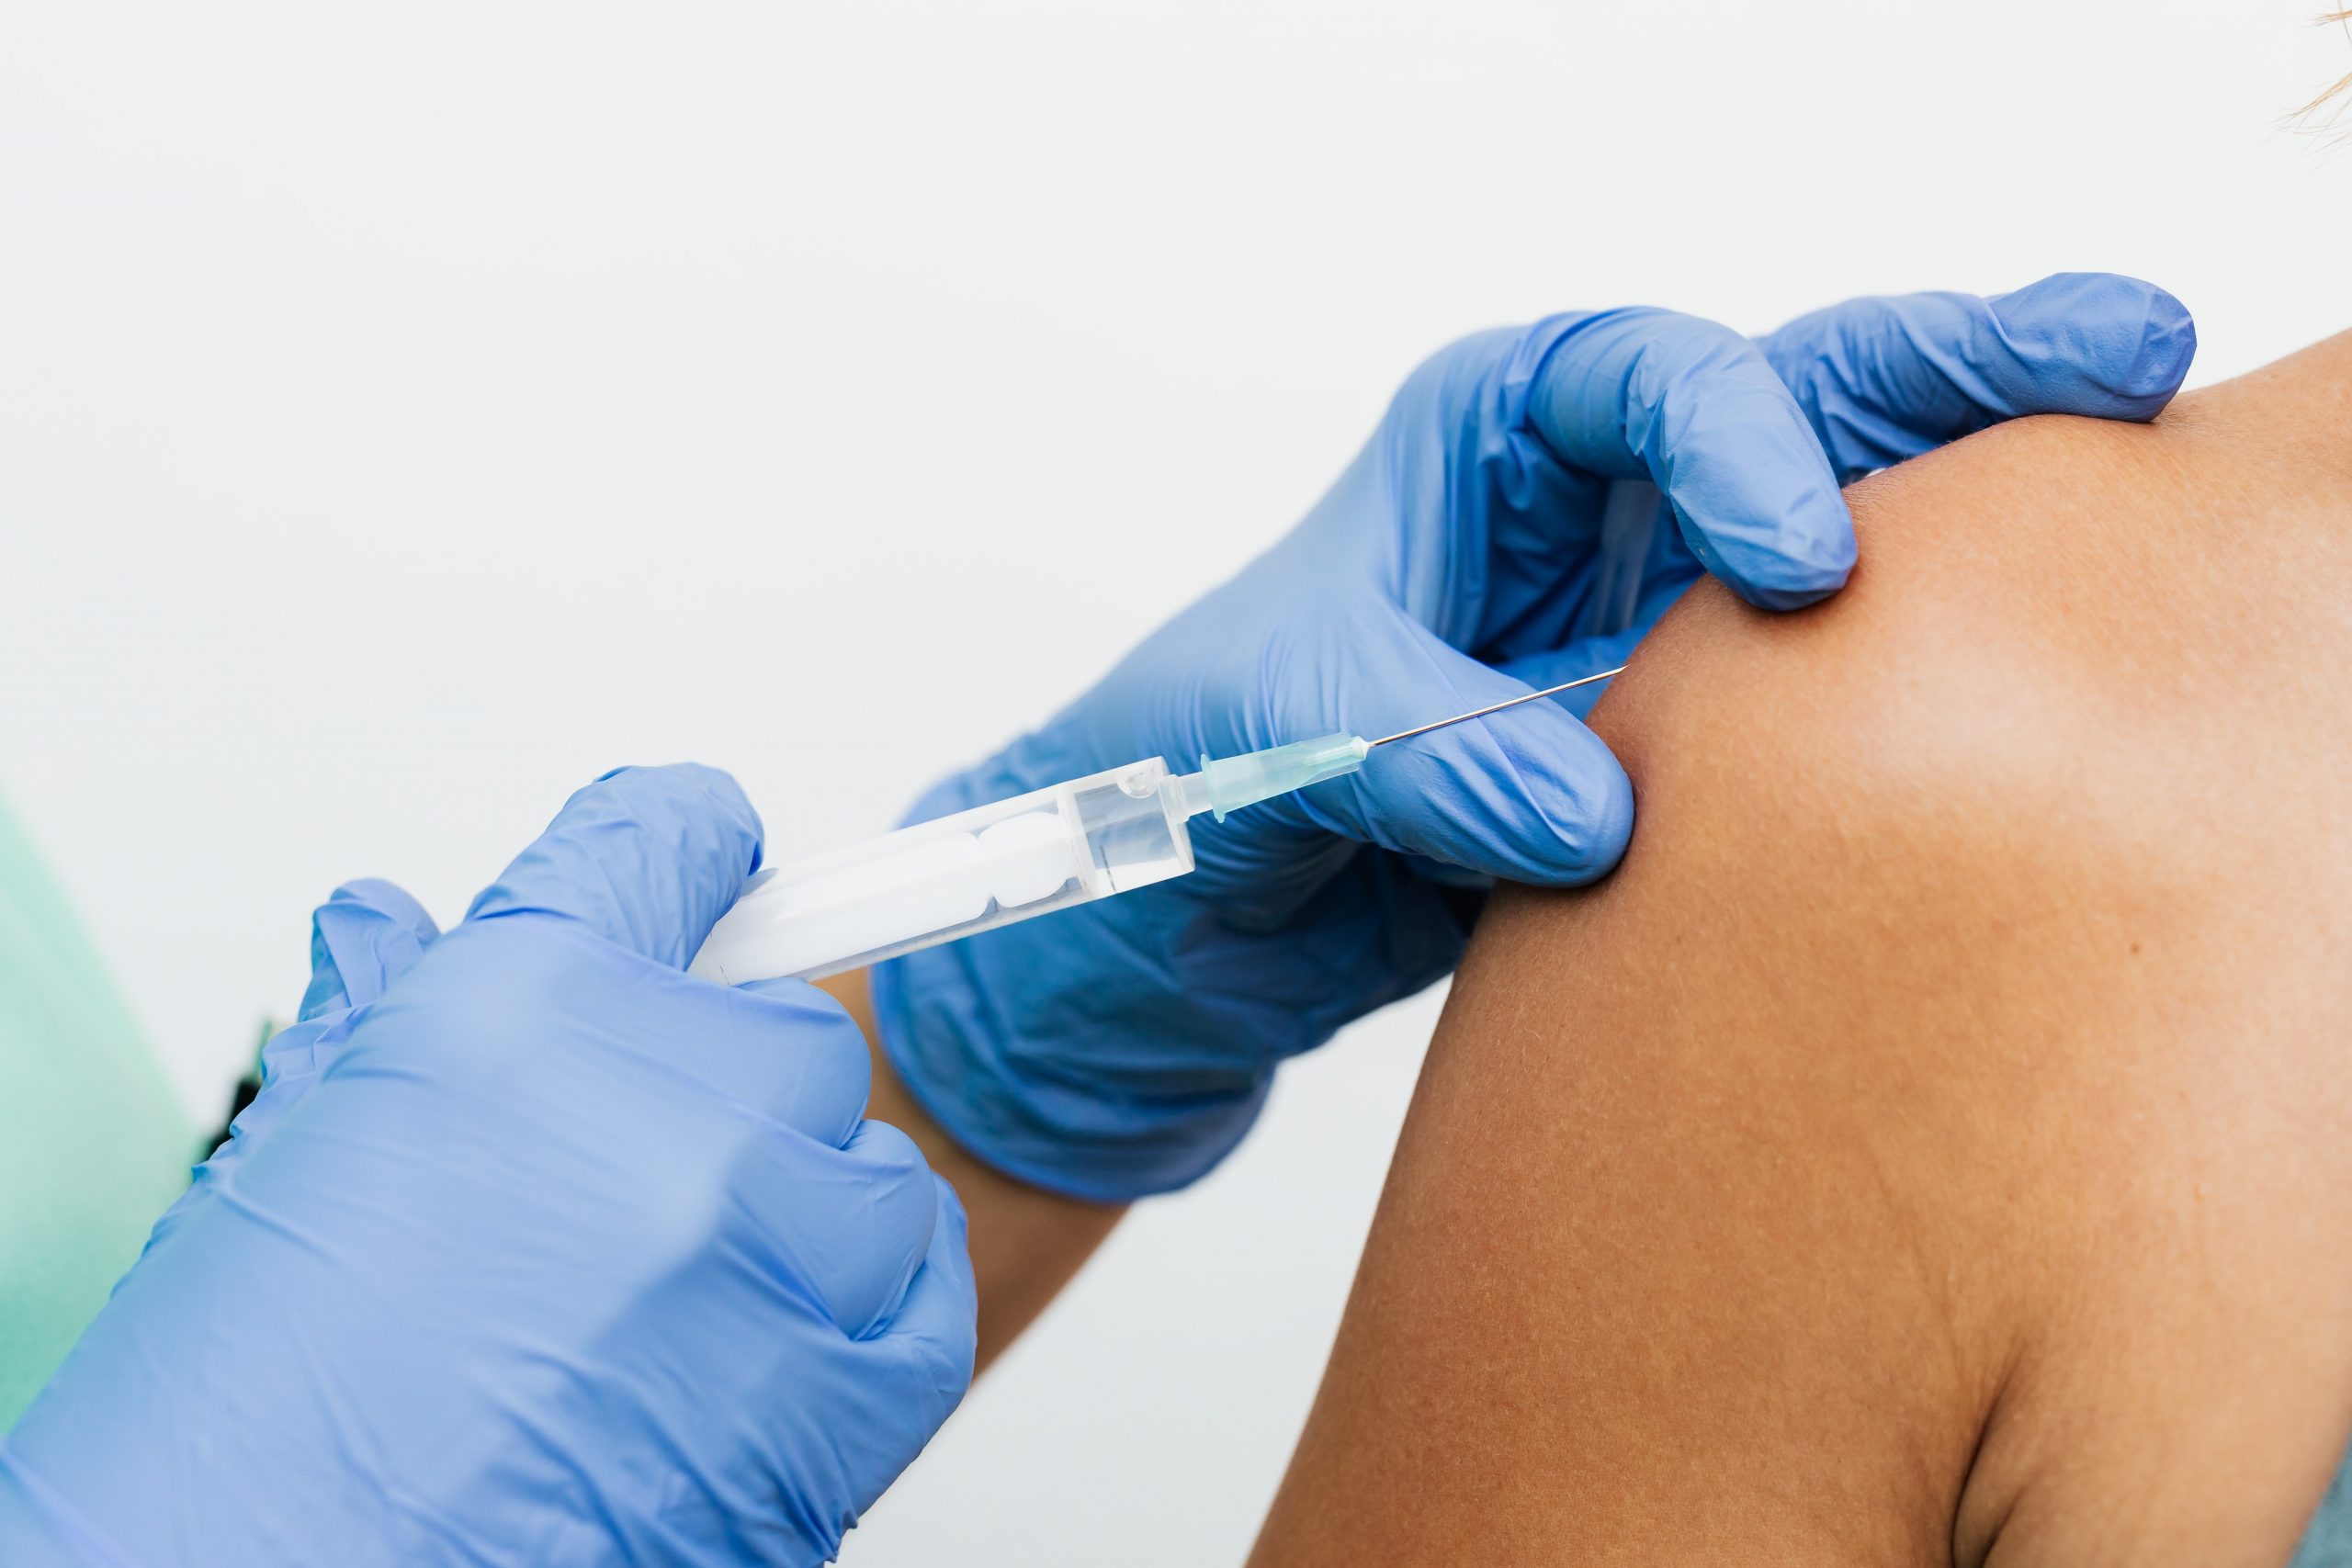 Analysis: Covid Vaccines Do Not Lead to More Deaths